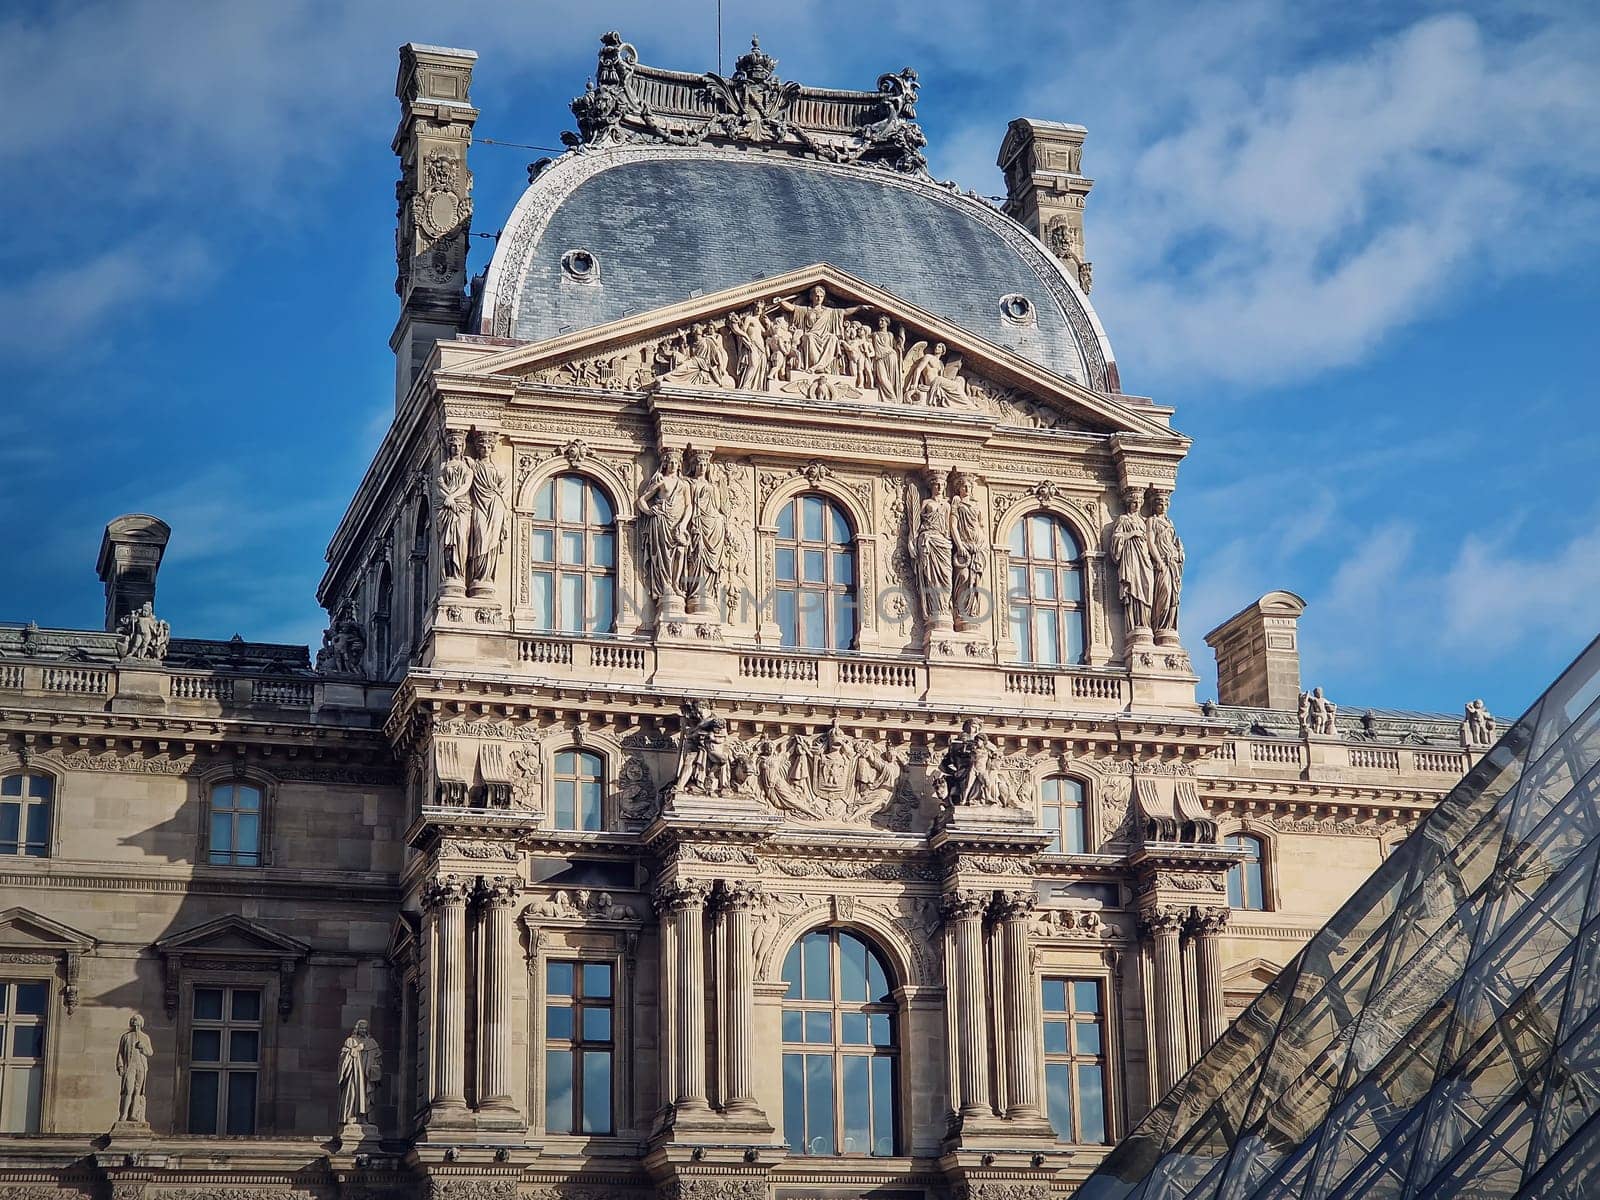 Closeup Louvre building, outdoors facade view of the famous museum palais in Paris, France by psychoshadow